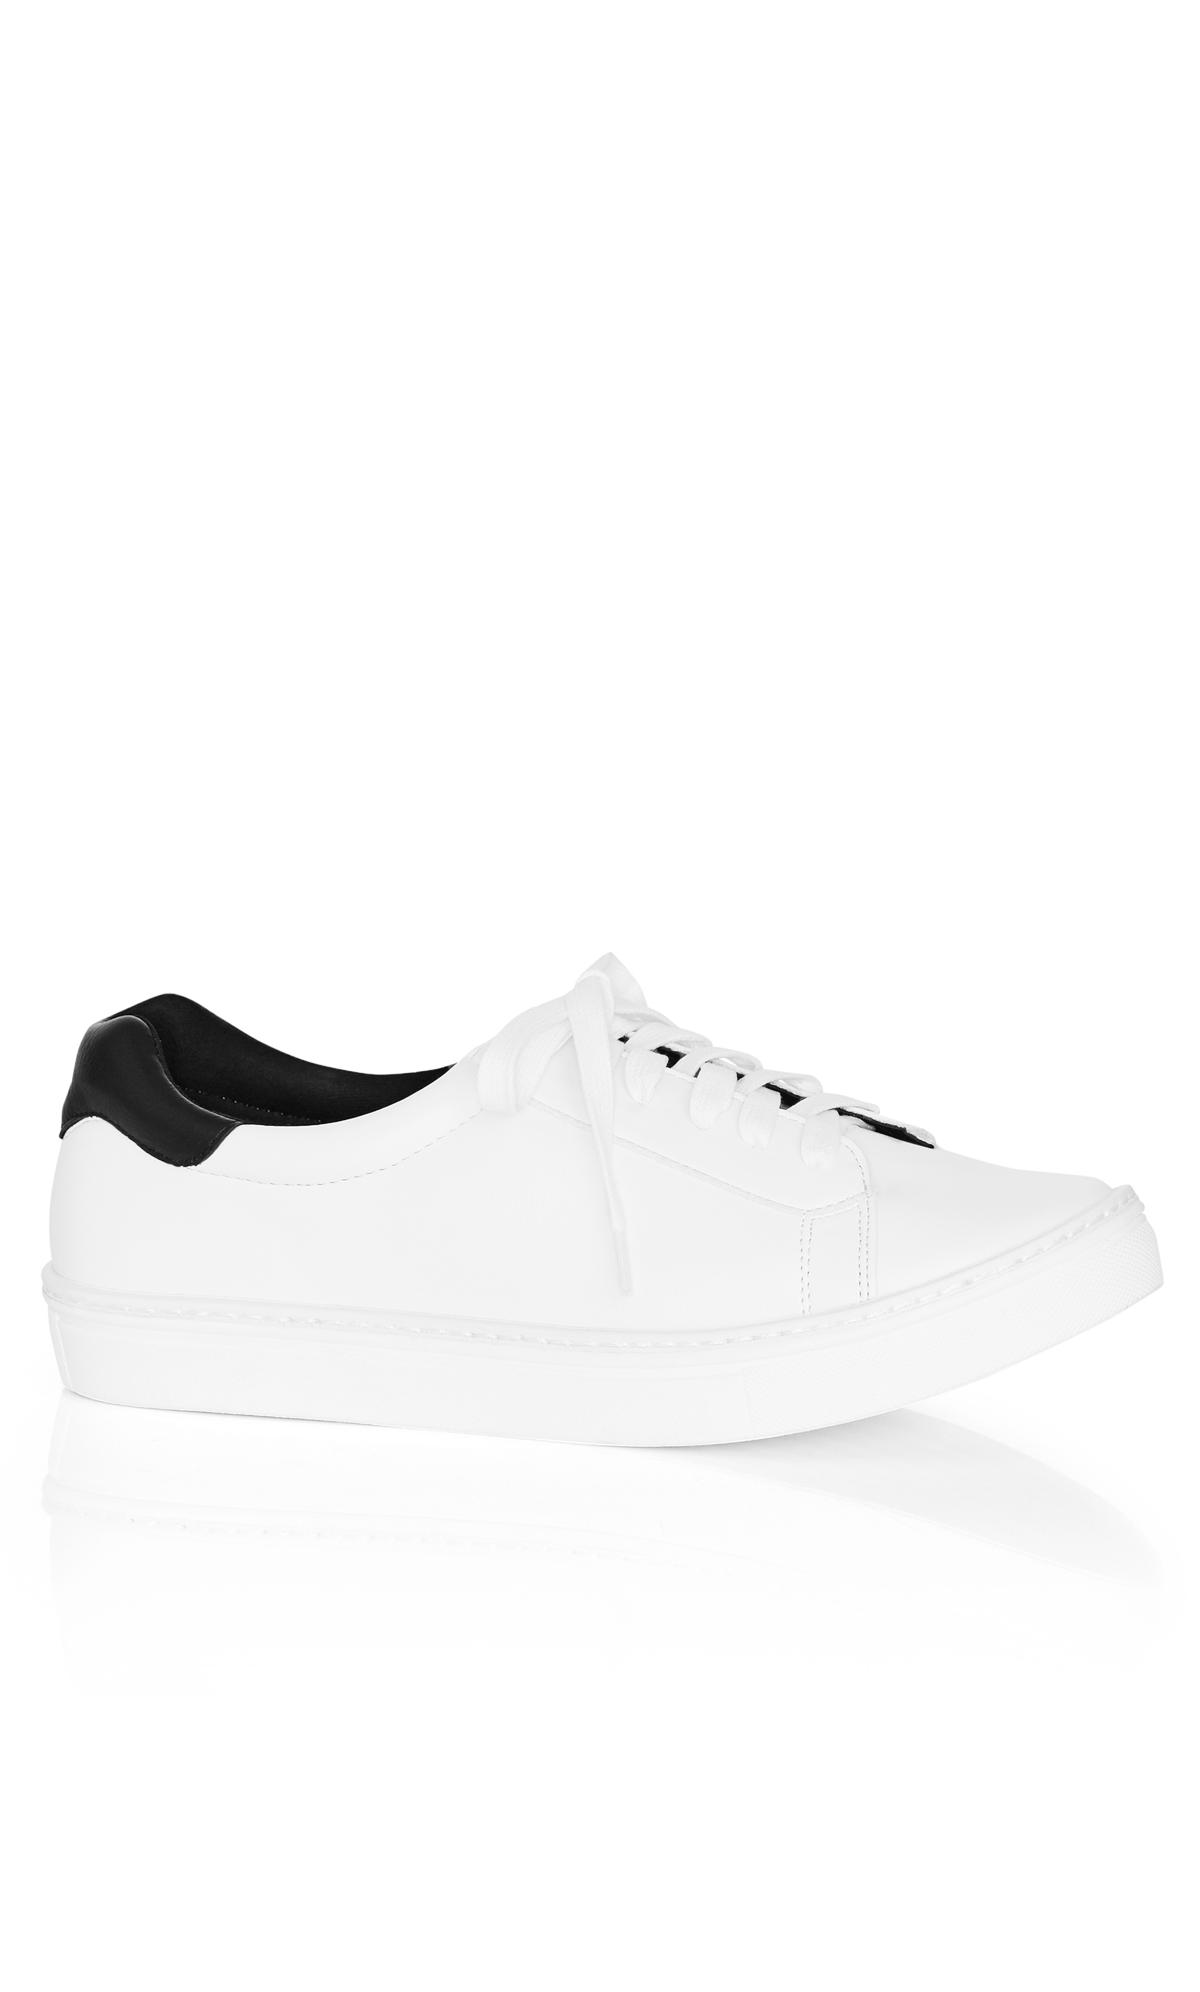 City Chic White & Black WIDE FIT Trainers 1